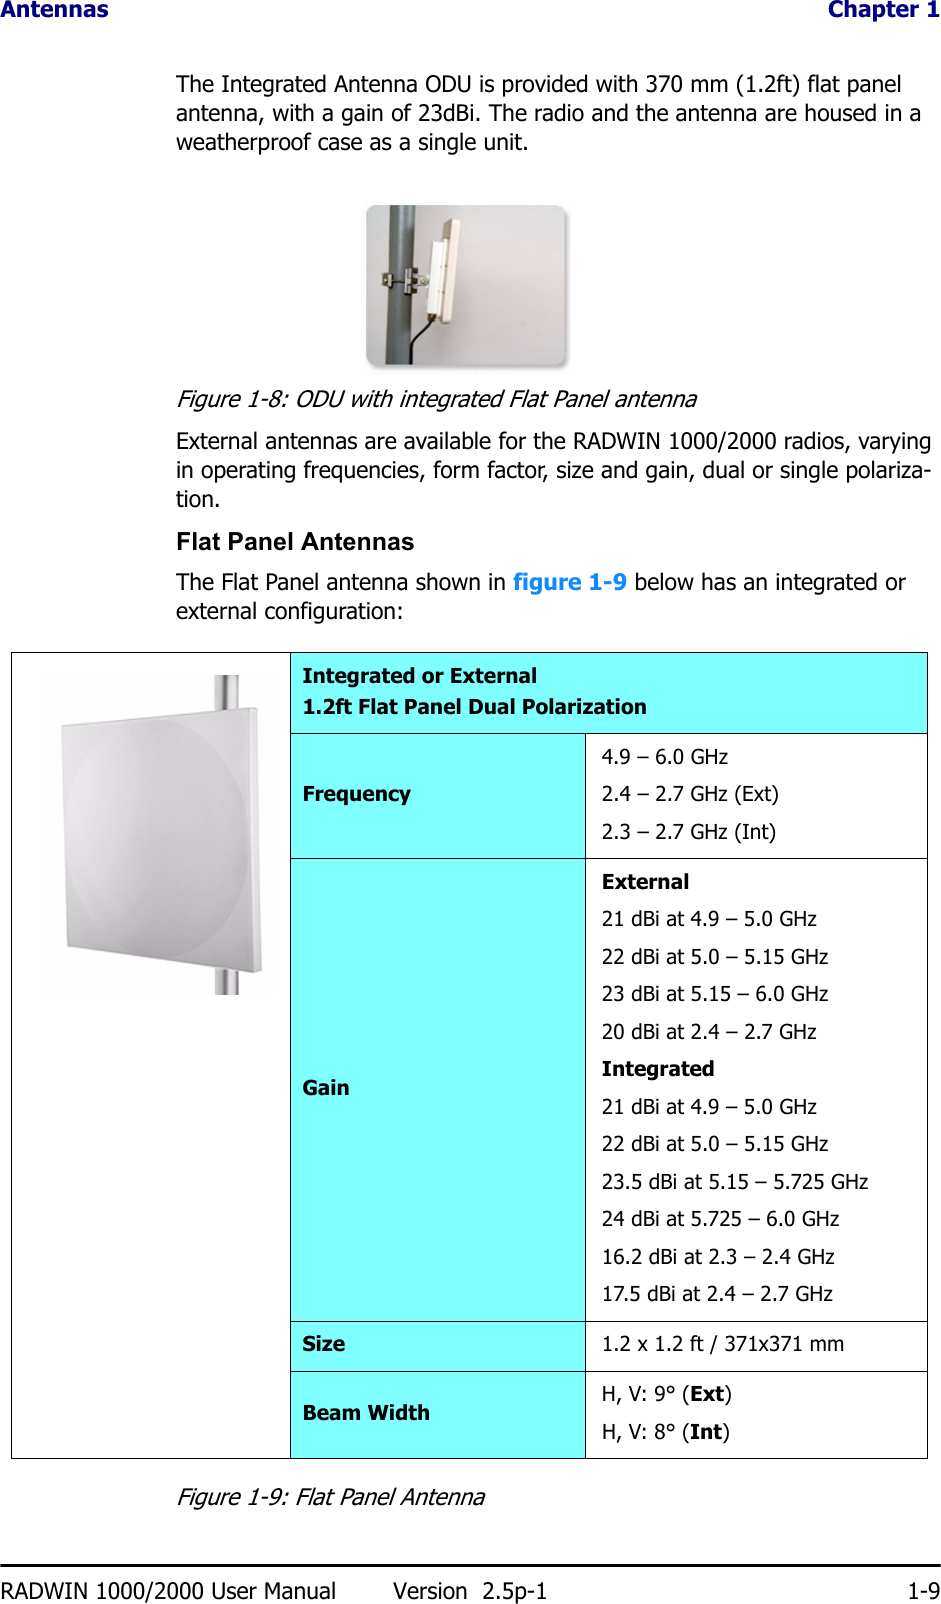 Antennas  Chapter 1RADWIN 1000/2000 User Manual Version  2.5p-1 1-9The Integrated Antenna ODU is provided with 370 mm (1.2ft) flat panel antenna, with a gain of 23dBi. The radio and the antenna are housed in a weatherproof case as a single unit.Figure 1-8: ODU with integrated Flat Panel antennaExternal antennas are available for the RADWIN 1000/2000 radios, varying in operating frequencies, form factor, size and gain, dual or single polariza-tion.Flat Panel AntennasThe Flat Panel antenna shown in figure 1-9 below has an integrated or external configuration:Figure 1-9: Flat Panel AntennaIntegrated or External1.2ft Flat Panel Dual PolarizationFrequency4.9 – 6.0 GHz2.4 – 2.7 GHz (Ext)2.3 – 2.7 GHz (Int)GainExternal21 dBi at 4.9 – 5.0 GHz 22 dBi at 5.0 – 5.15 GHz 23 dBi at 5.15 – 6.0 GHz20 dBi at 2.4 – 2.7 GHzIntegrated21 dBi at 4.9 – 5.0 GHz 22 dBi at 5.0 – 5.15 GHz 23.5 dBi at 5.15 – 5.725 GHz24 dBi at 5.725 – 6.0 GHz16.2 dBi at 2.3 – 2.4 GHz17.5 dBi at 2.4 – 2.7 GHzSize 1.2 x 1.2 ft / 371x371 mmBeam Width H, V: 9° (Ext)H, V: 8° (Int)